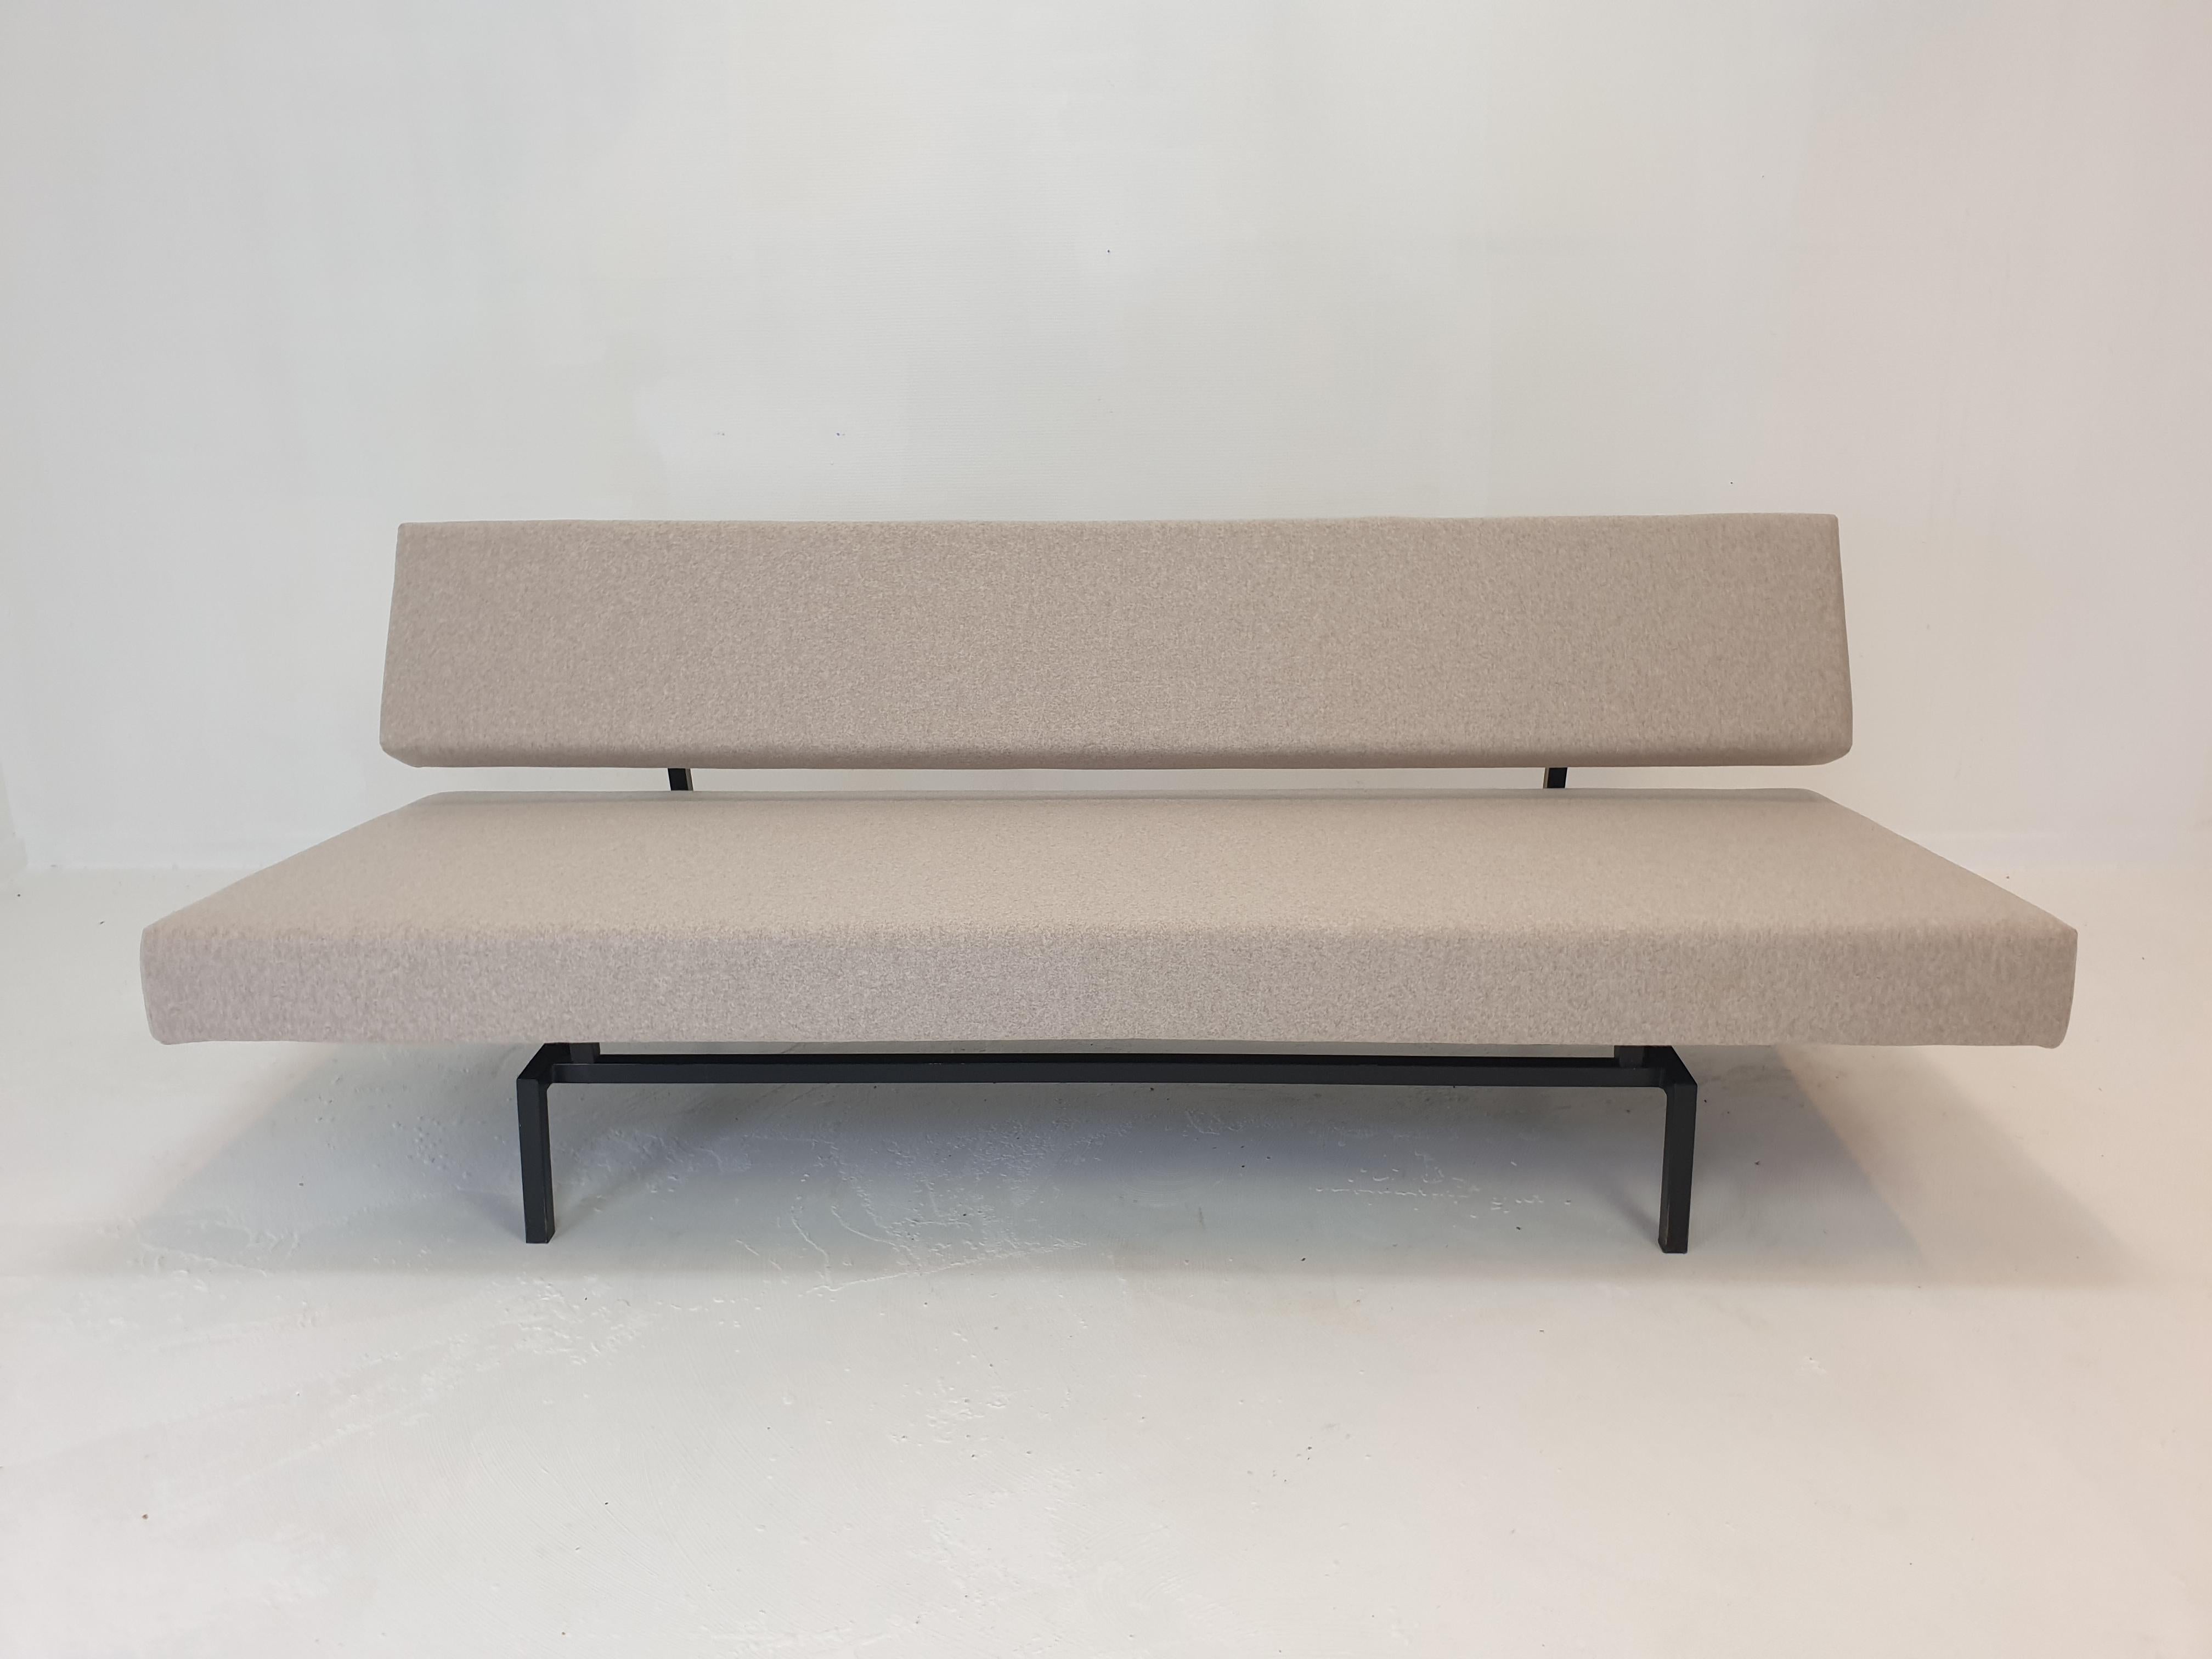 Sleeping sofa, designed by the famous Martin Visser in the 60's. 
Fabricated by 't Spectrum, The Netherlands. 

Simple high quality metal structure with maximum comfort. 

Just restored with new foam and new high quality Kvadrat 100% wool